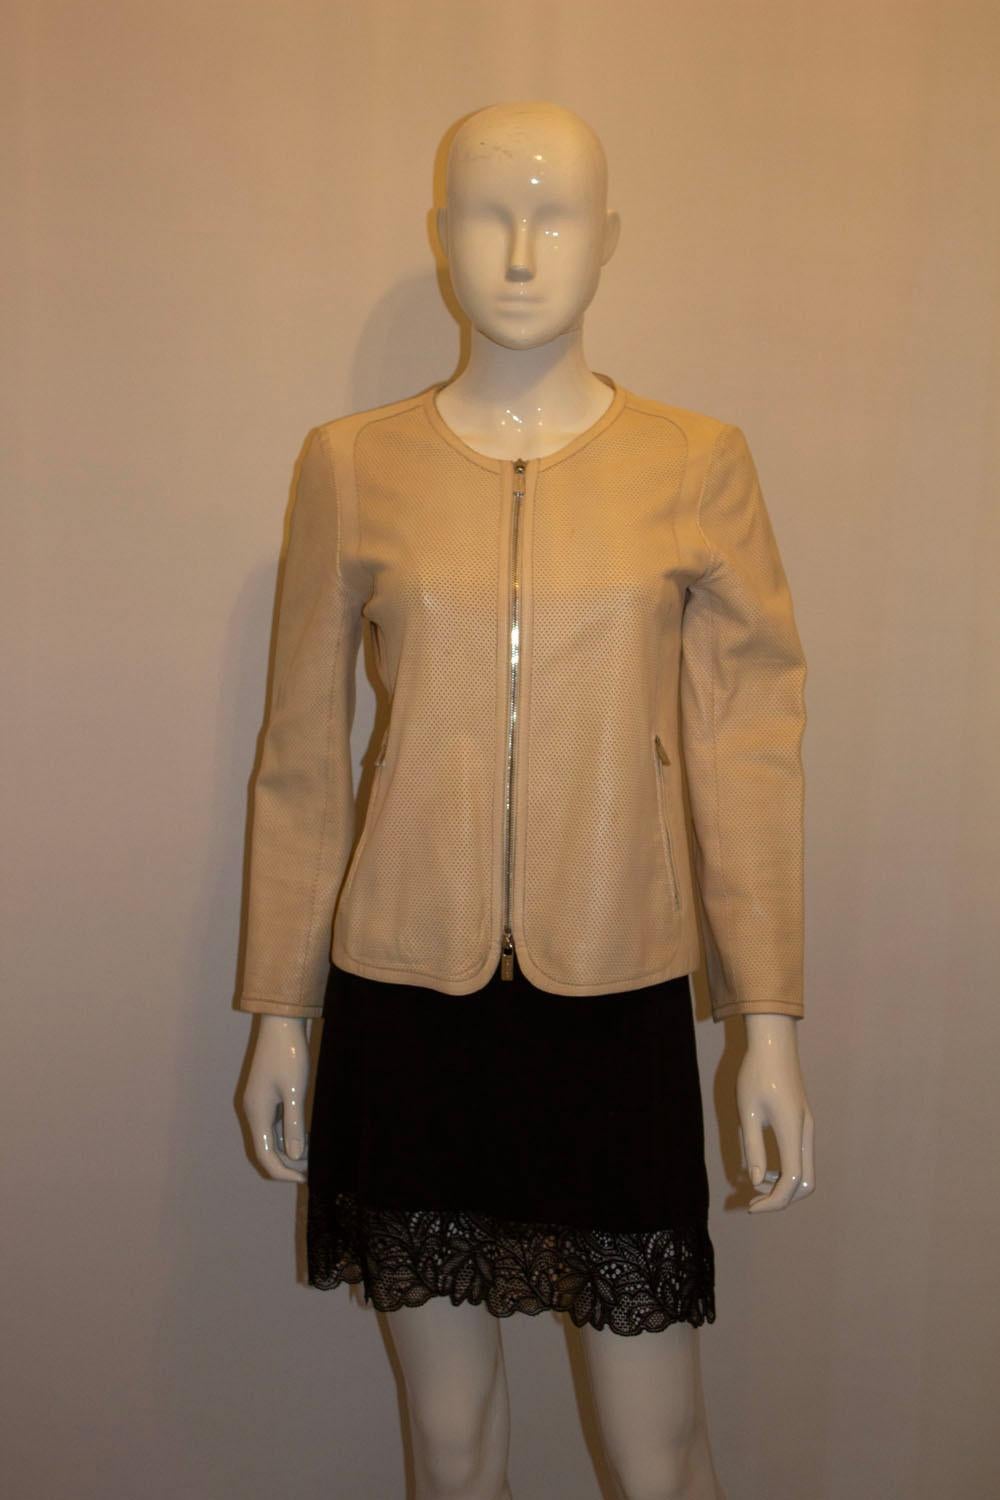  A super soft leather jacket by Celine. The leather jacket has a zip front opening , and two zip pocket, and zip cuffs. It has perforation detail on the front and has a round collar. 
Size 38 Measurements; Bust up to 36'', length 22'